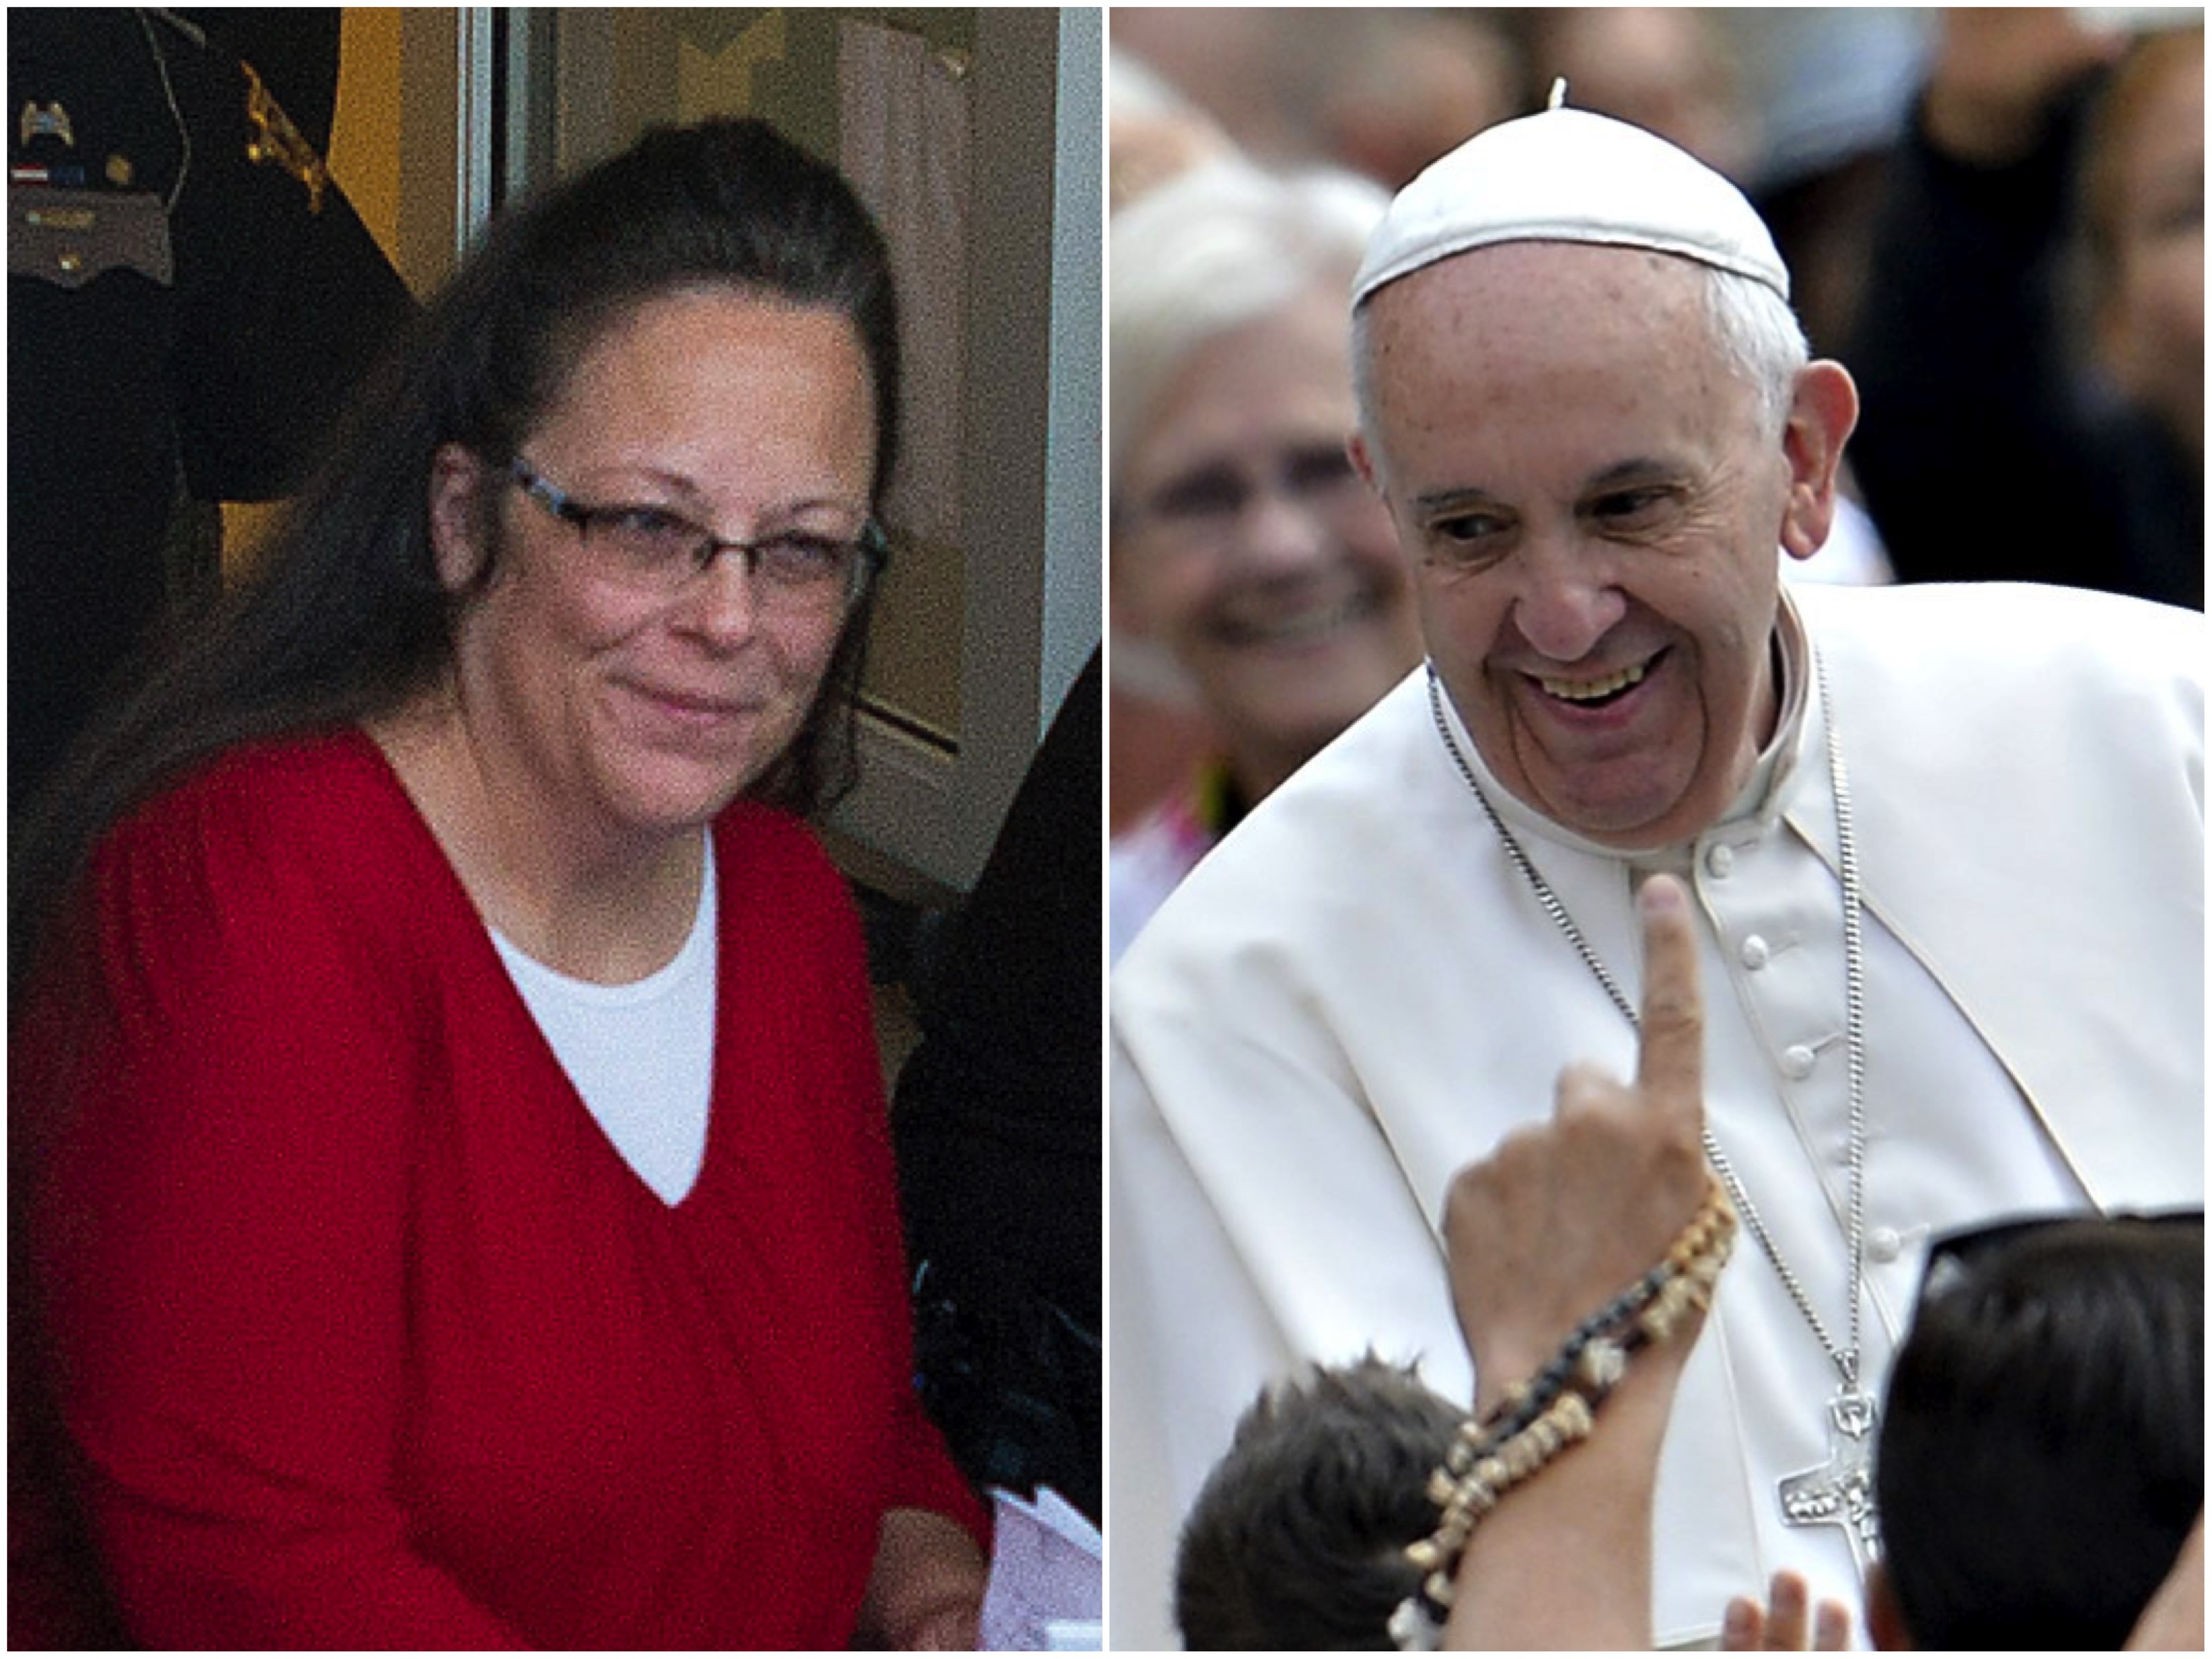 Pope Francis and Kim Davis, a meeting of intrigue